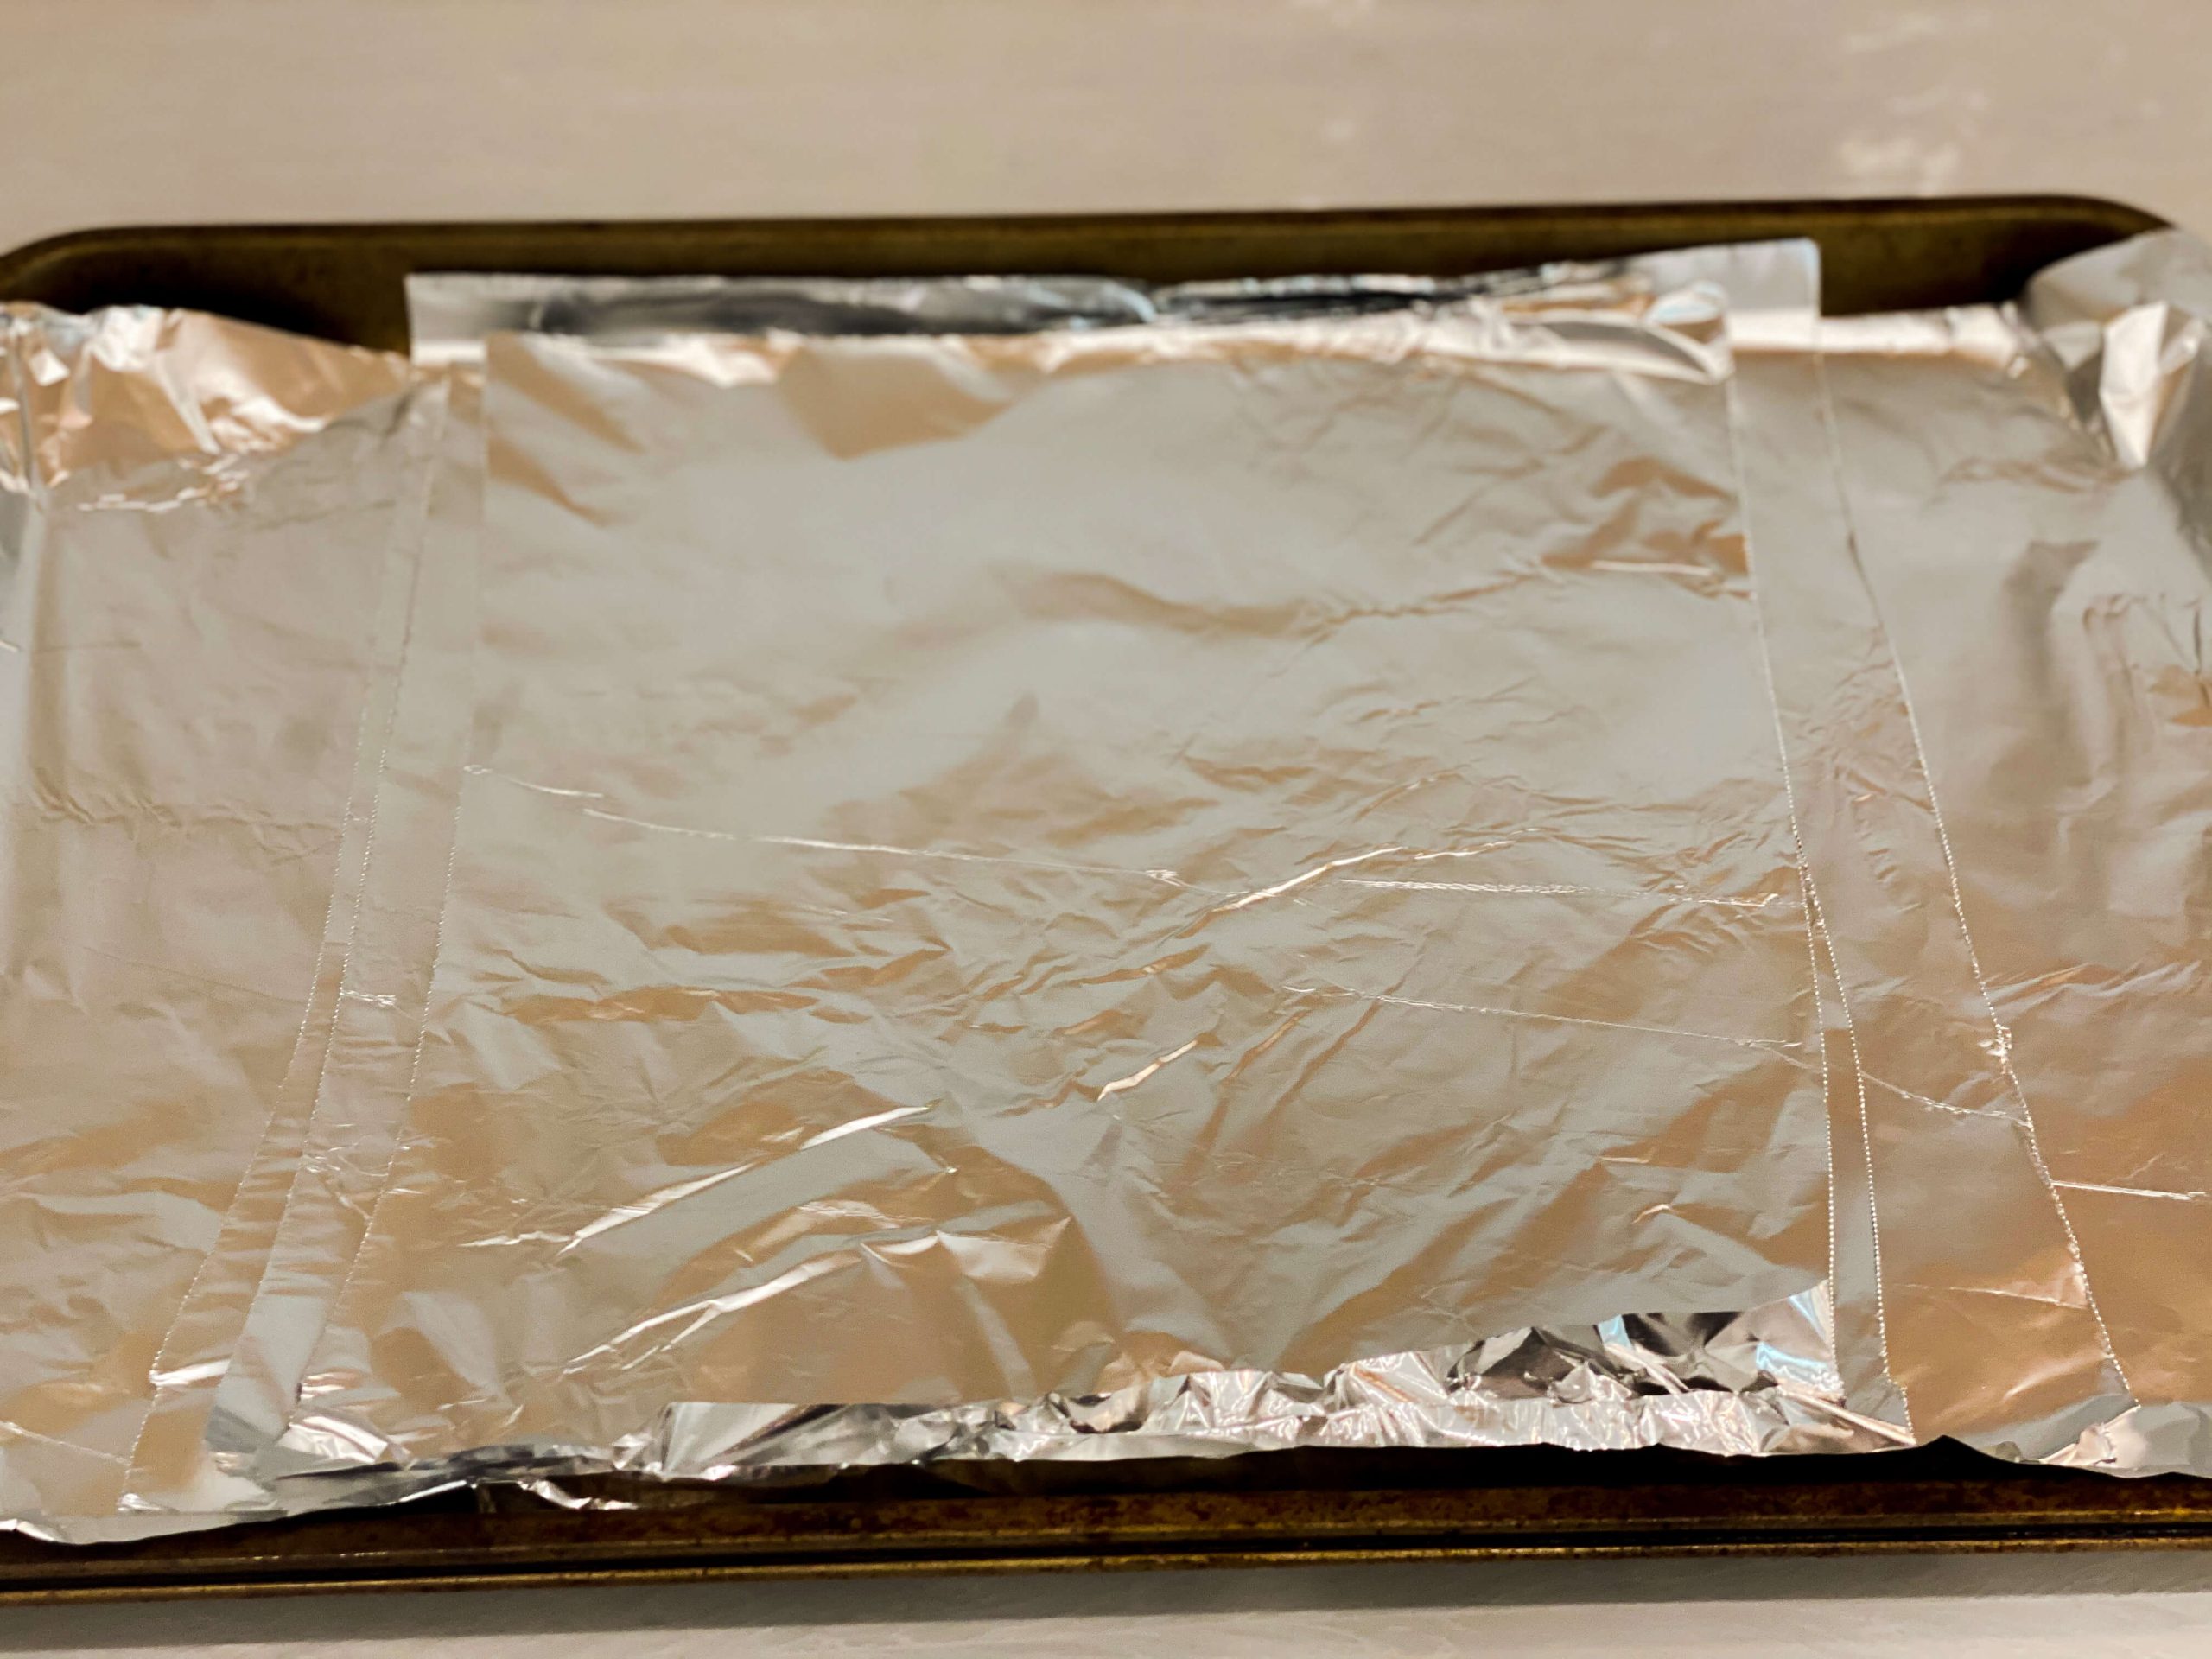 baking sheet lined with aluminum foil big enough to fit the apple Tarte Tatin